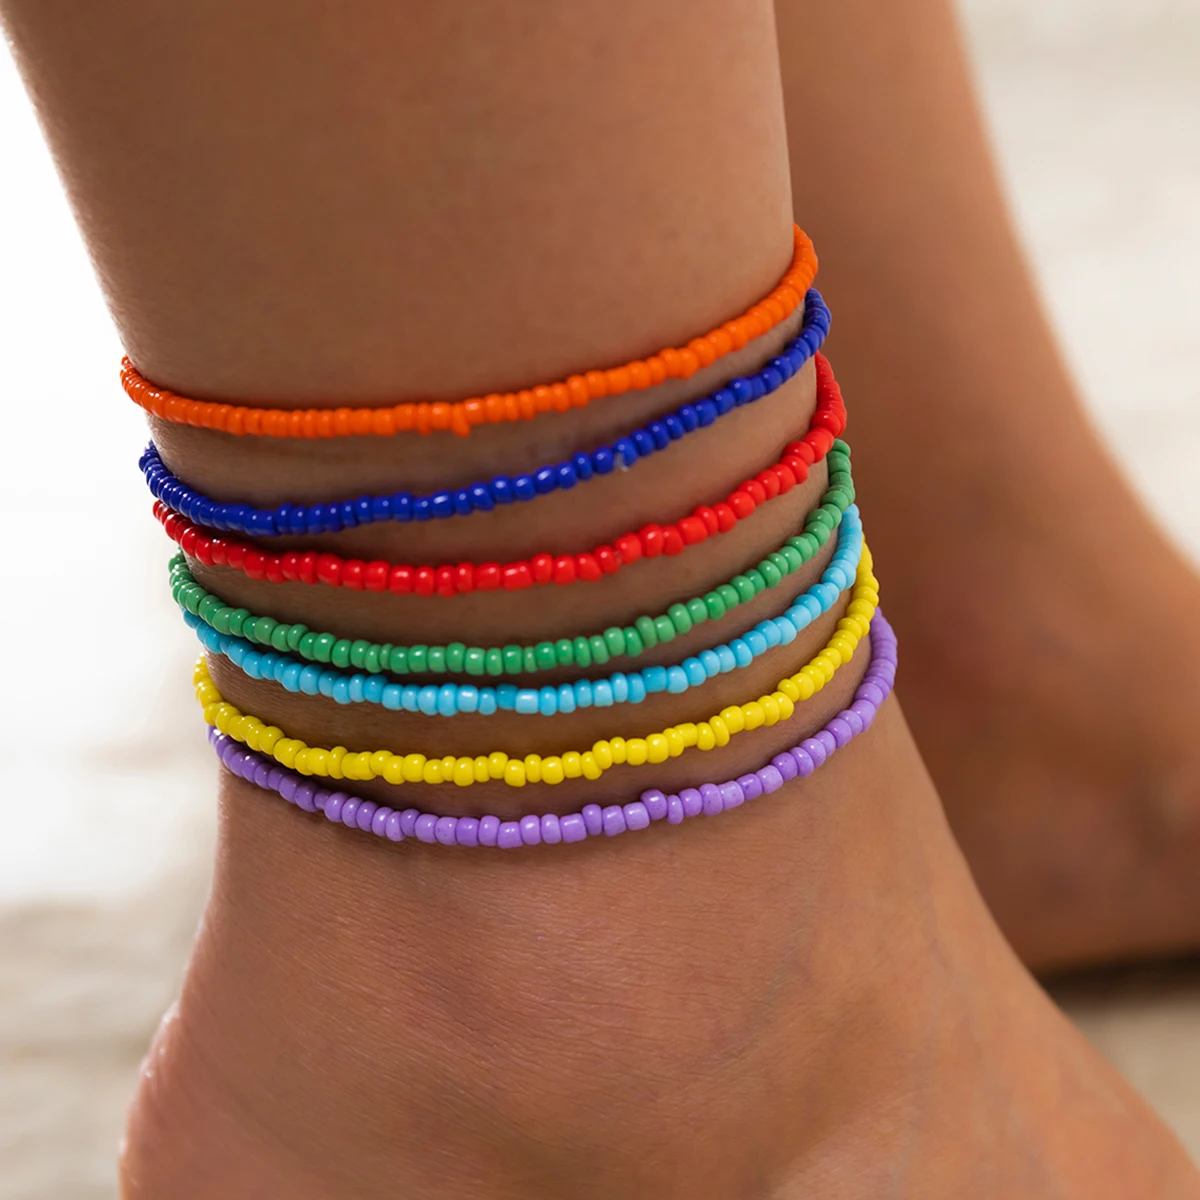 

IngeSight.Z 7Pcs/Set Rainbow Colorful Seed Beaded Anklets Bracelets Adjustable Anklets Barefoot Sandals On Foot Ankle Jewelry